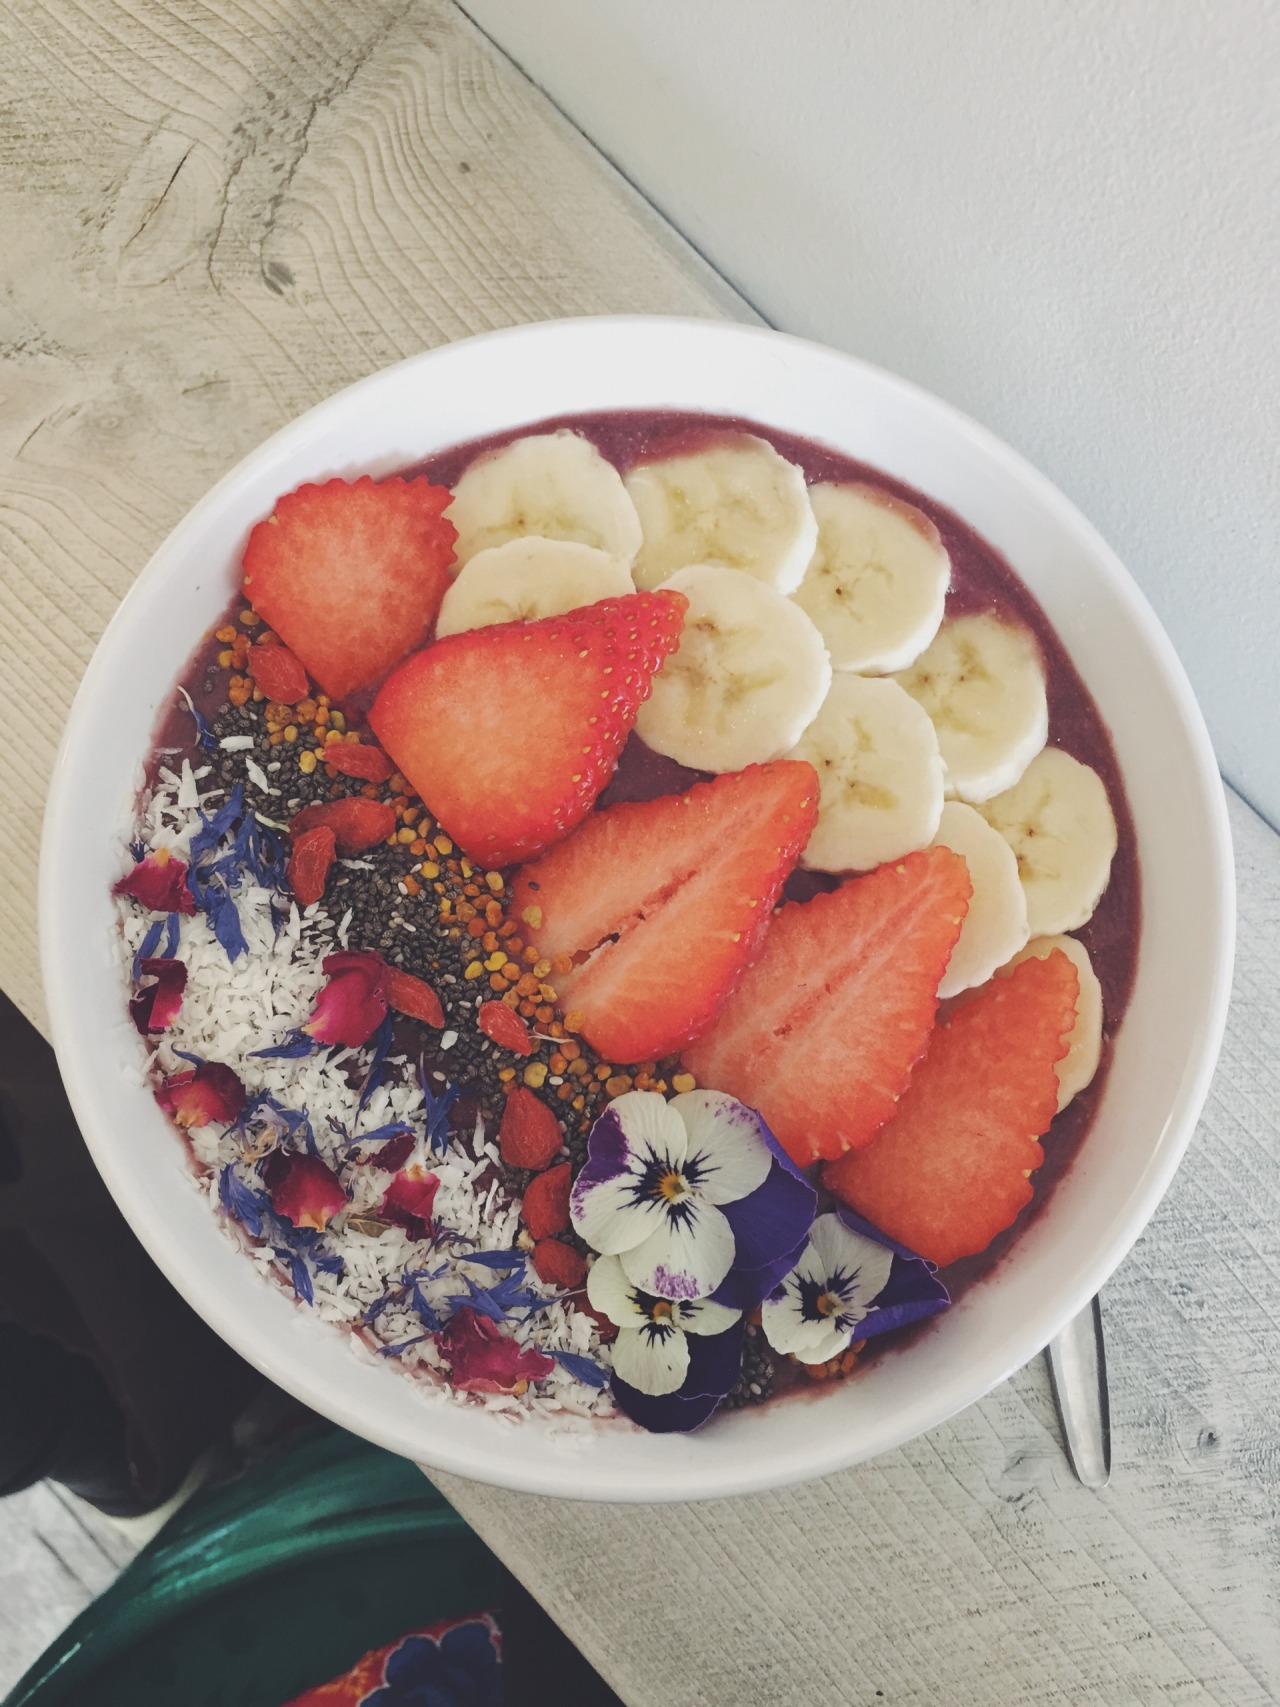 momentsofjuly: my beautiful looking acai bowl in... - you know what it is